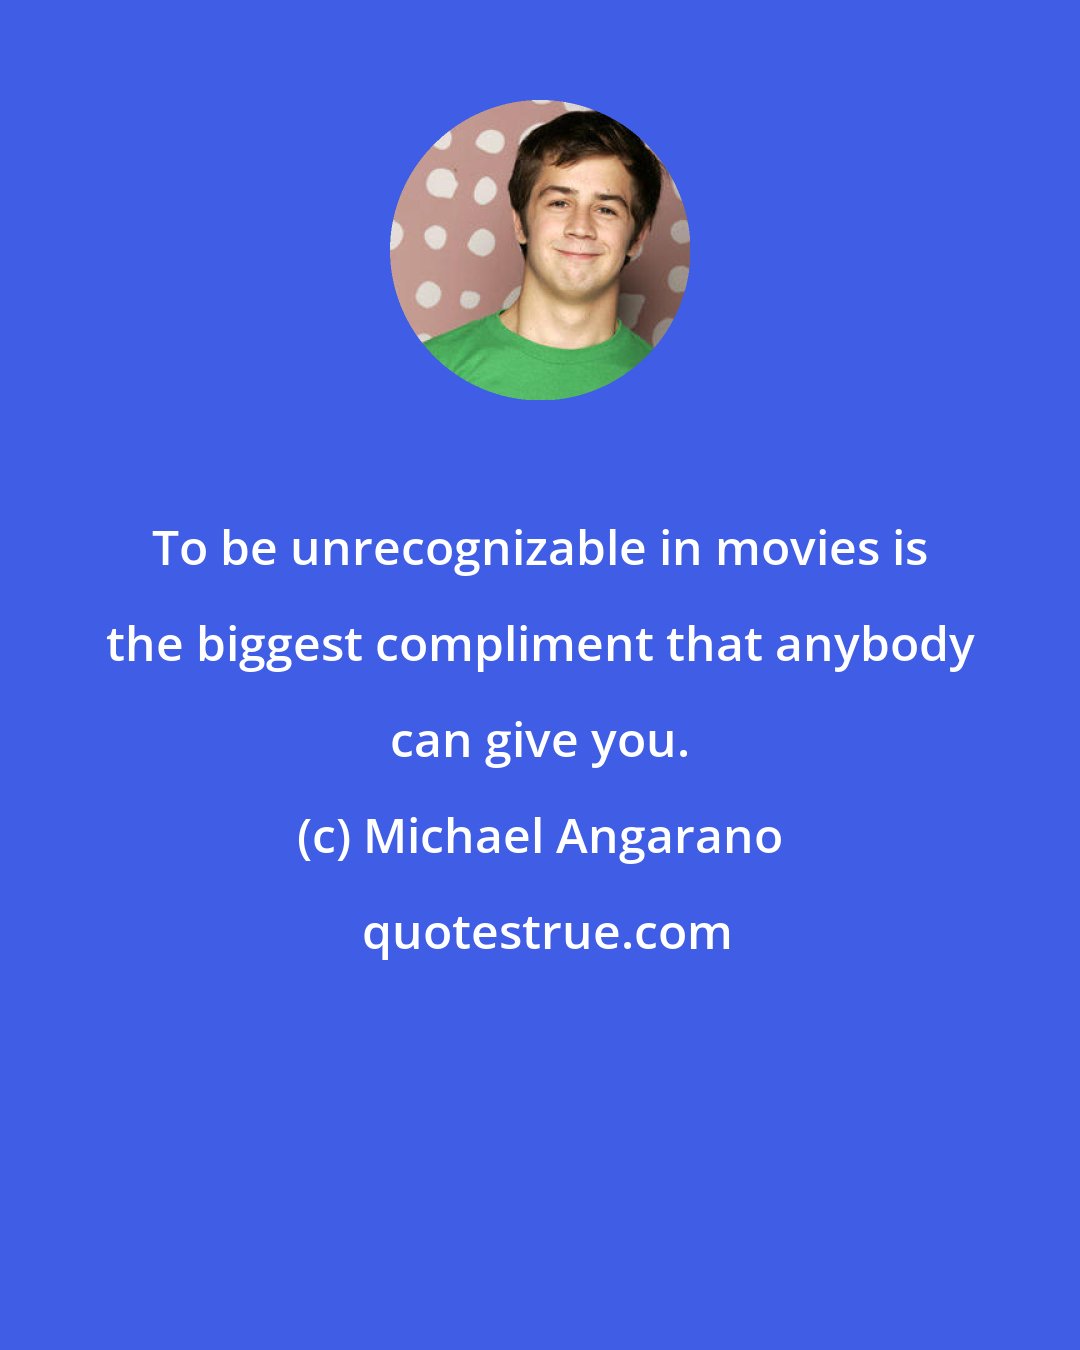 Michael Angarano: To be unrecognizable in movies is the biggest compliment that anybody can give you.